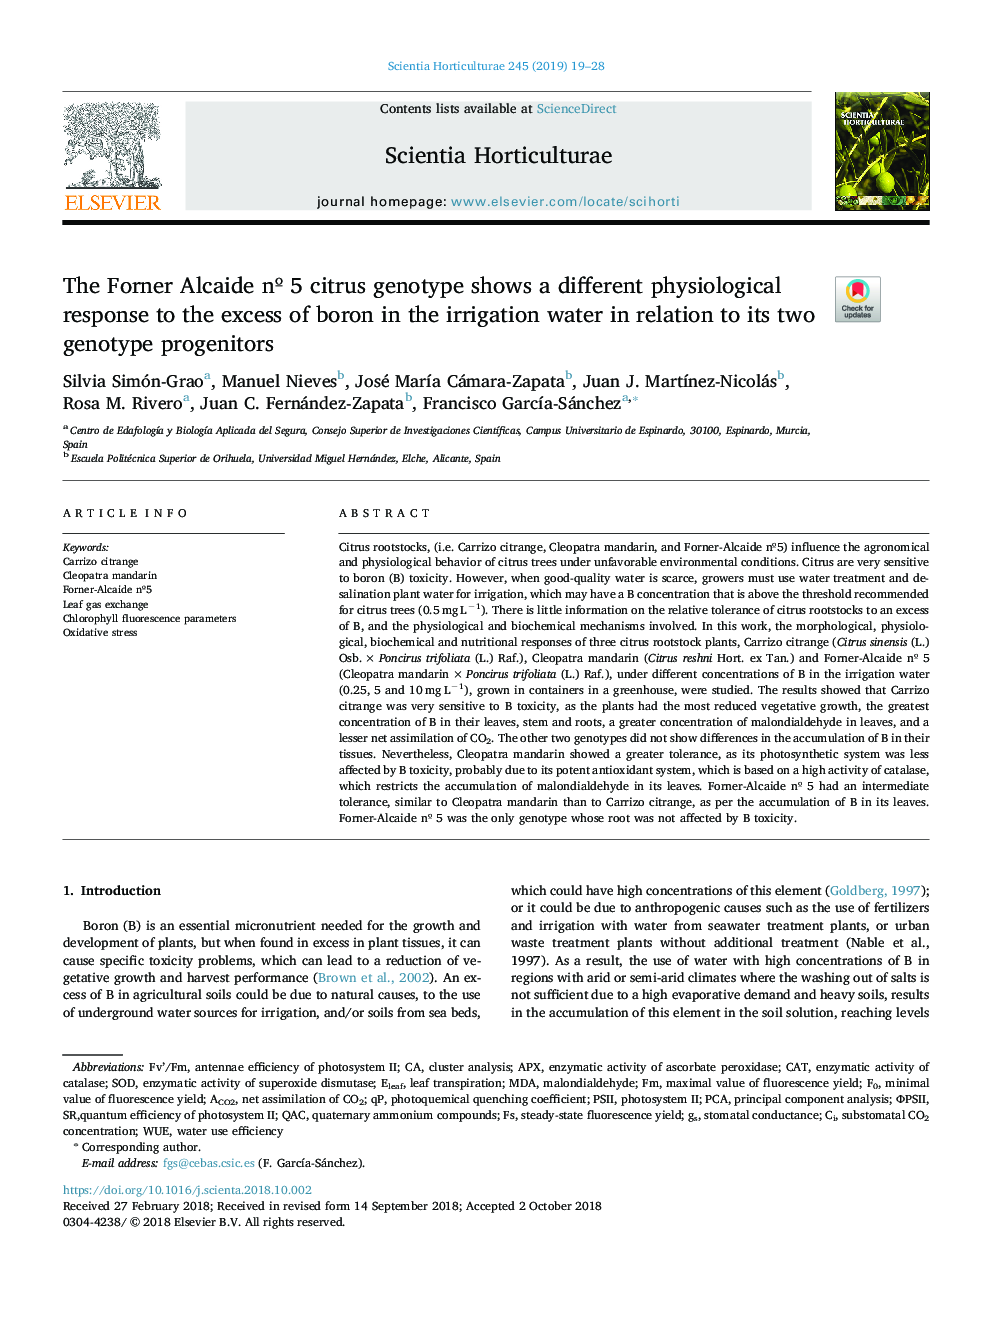 The Forner Alcaide nÂº 5 citrus genotype shows a different physiological response to the excess of boron in the irrigation water in relation to its two genotype progenitors